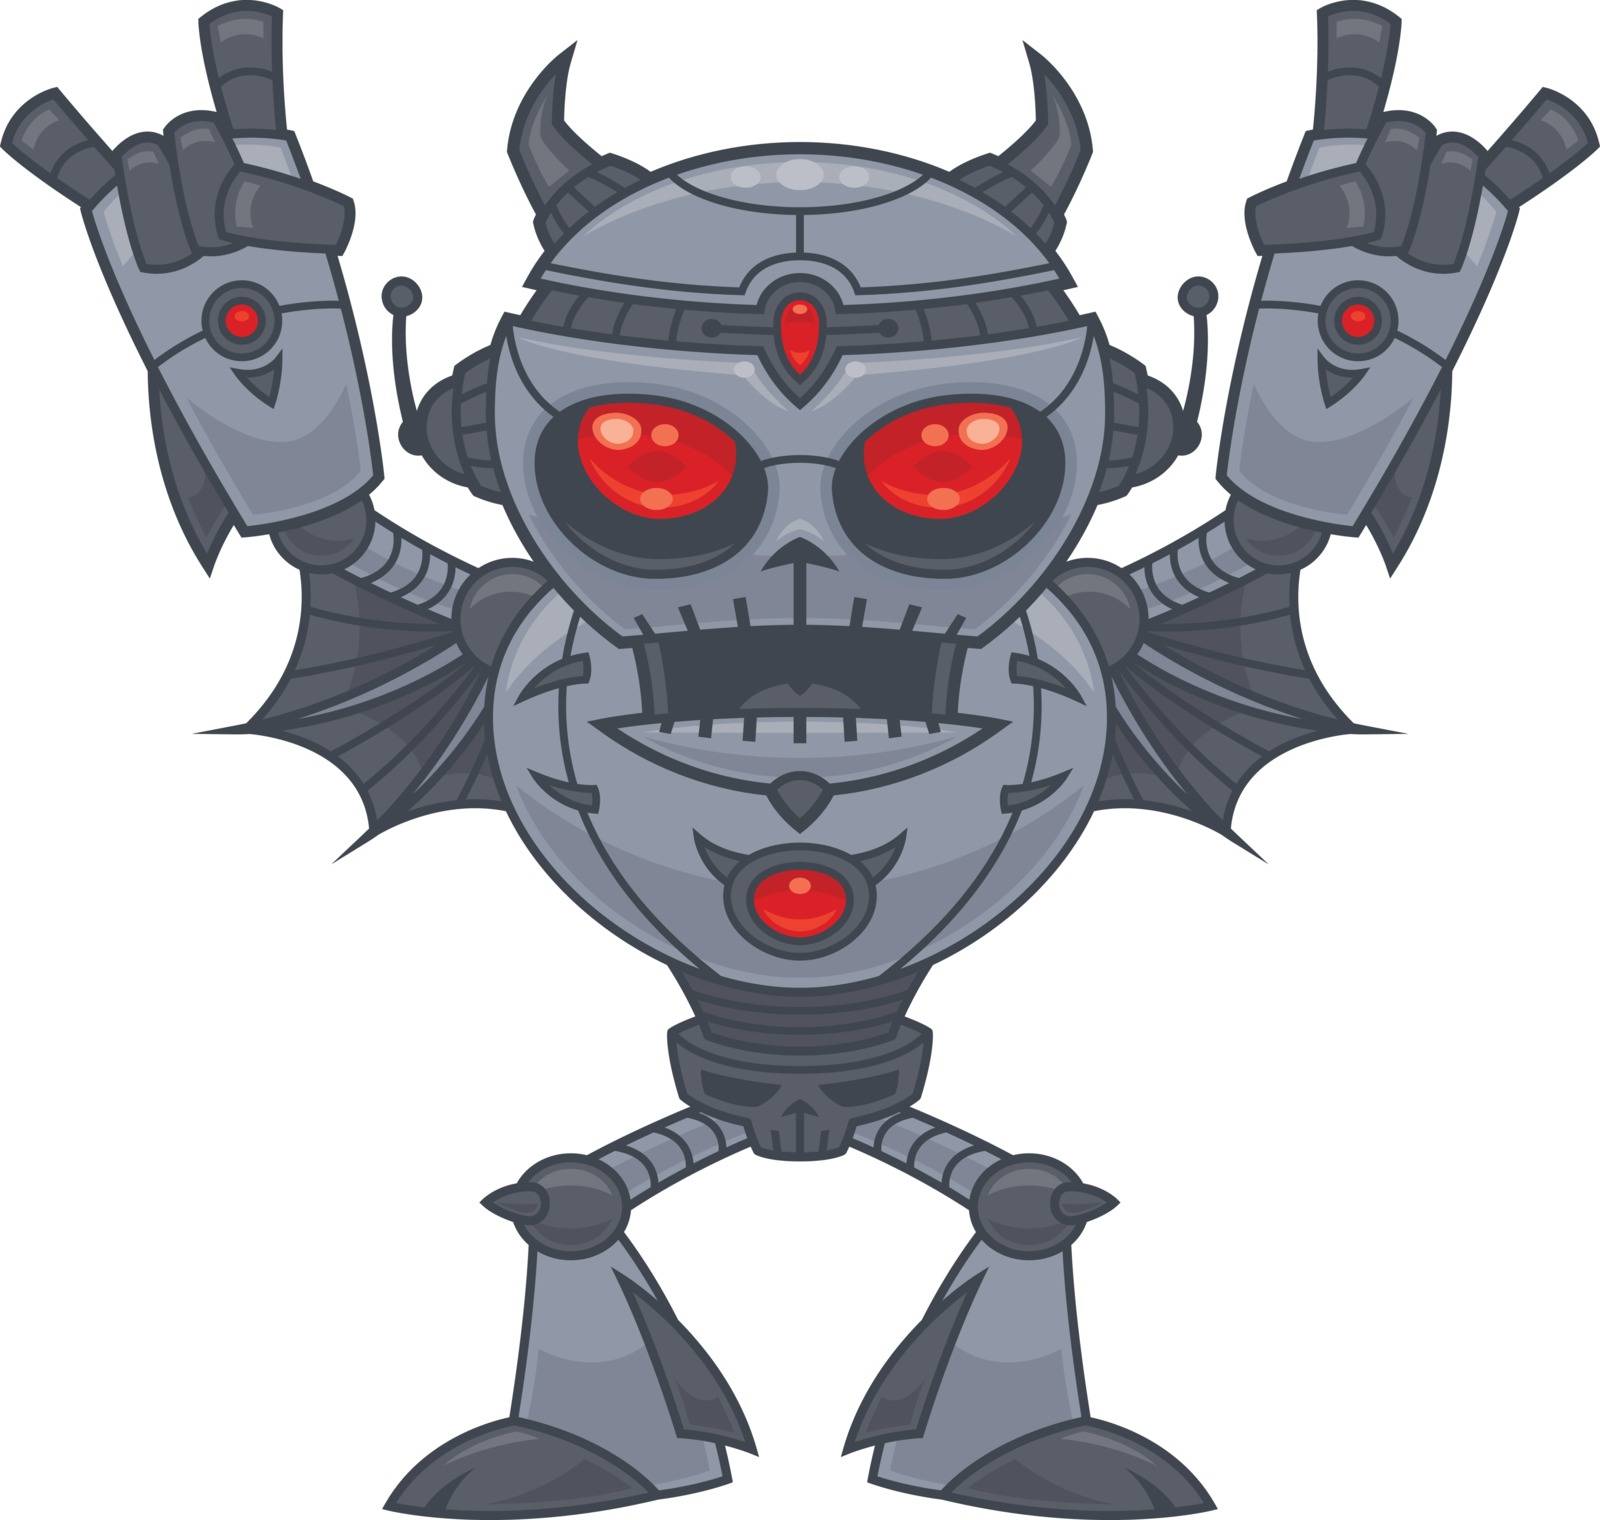 Vector cartoon illustration of a red eyed heavy metal loving robot with devil horn hand gestures.